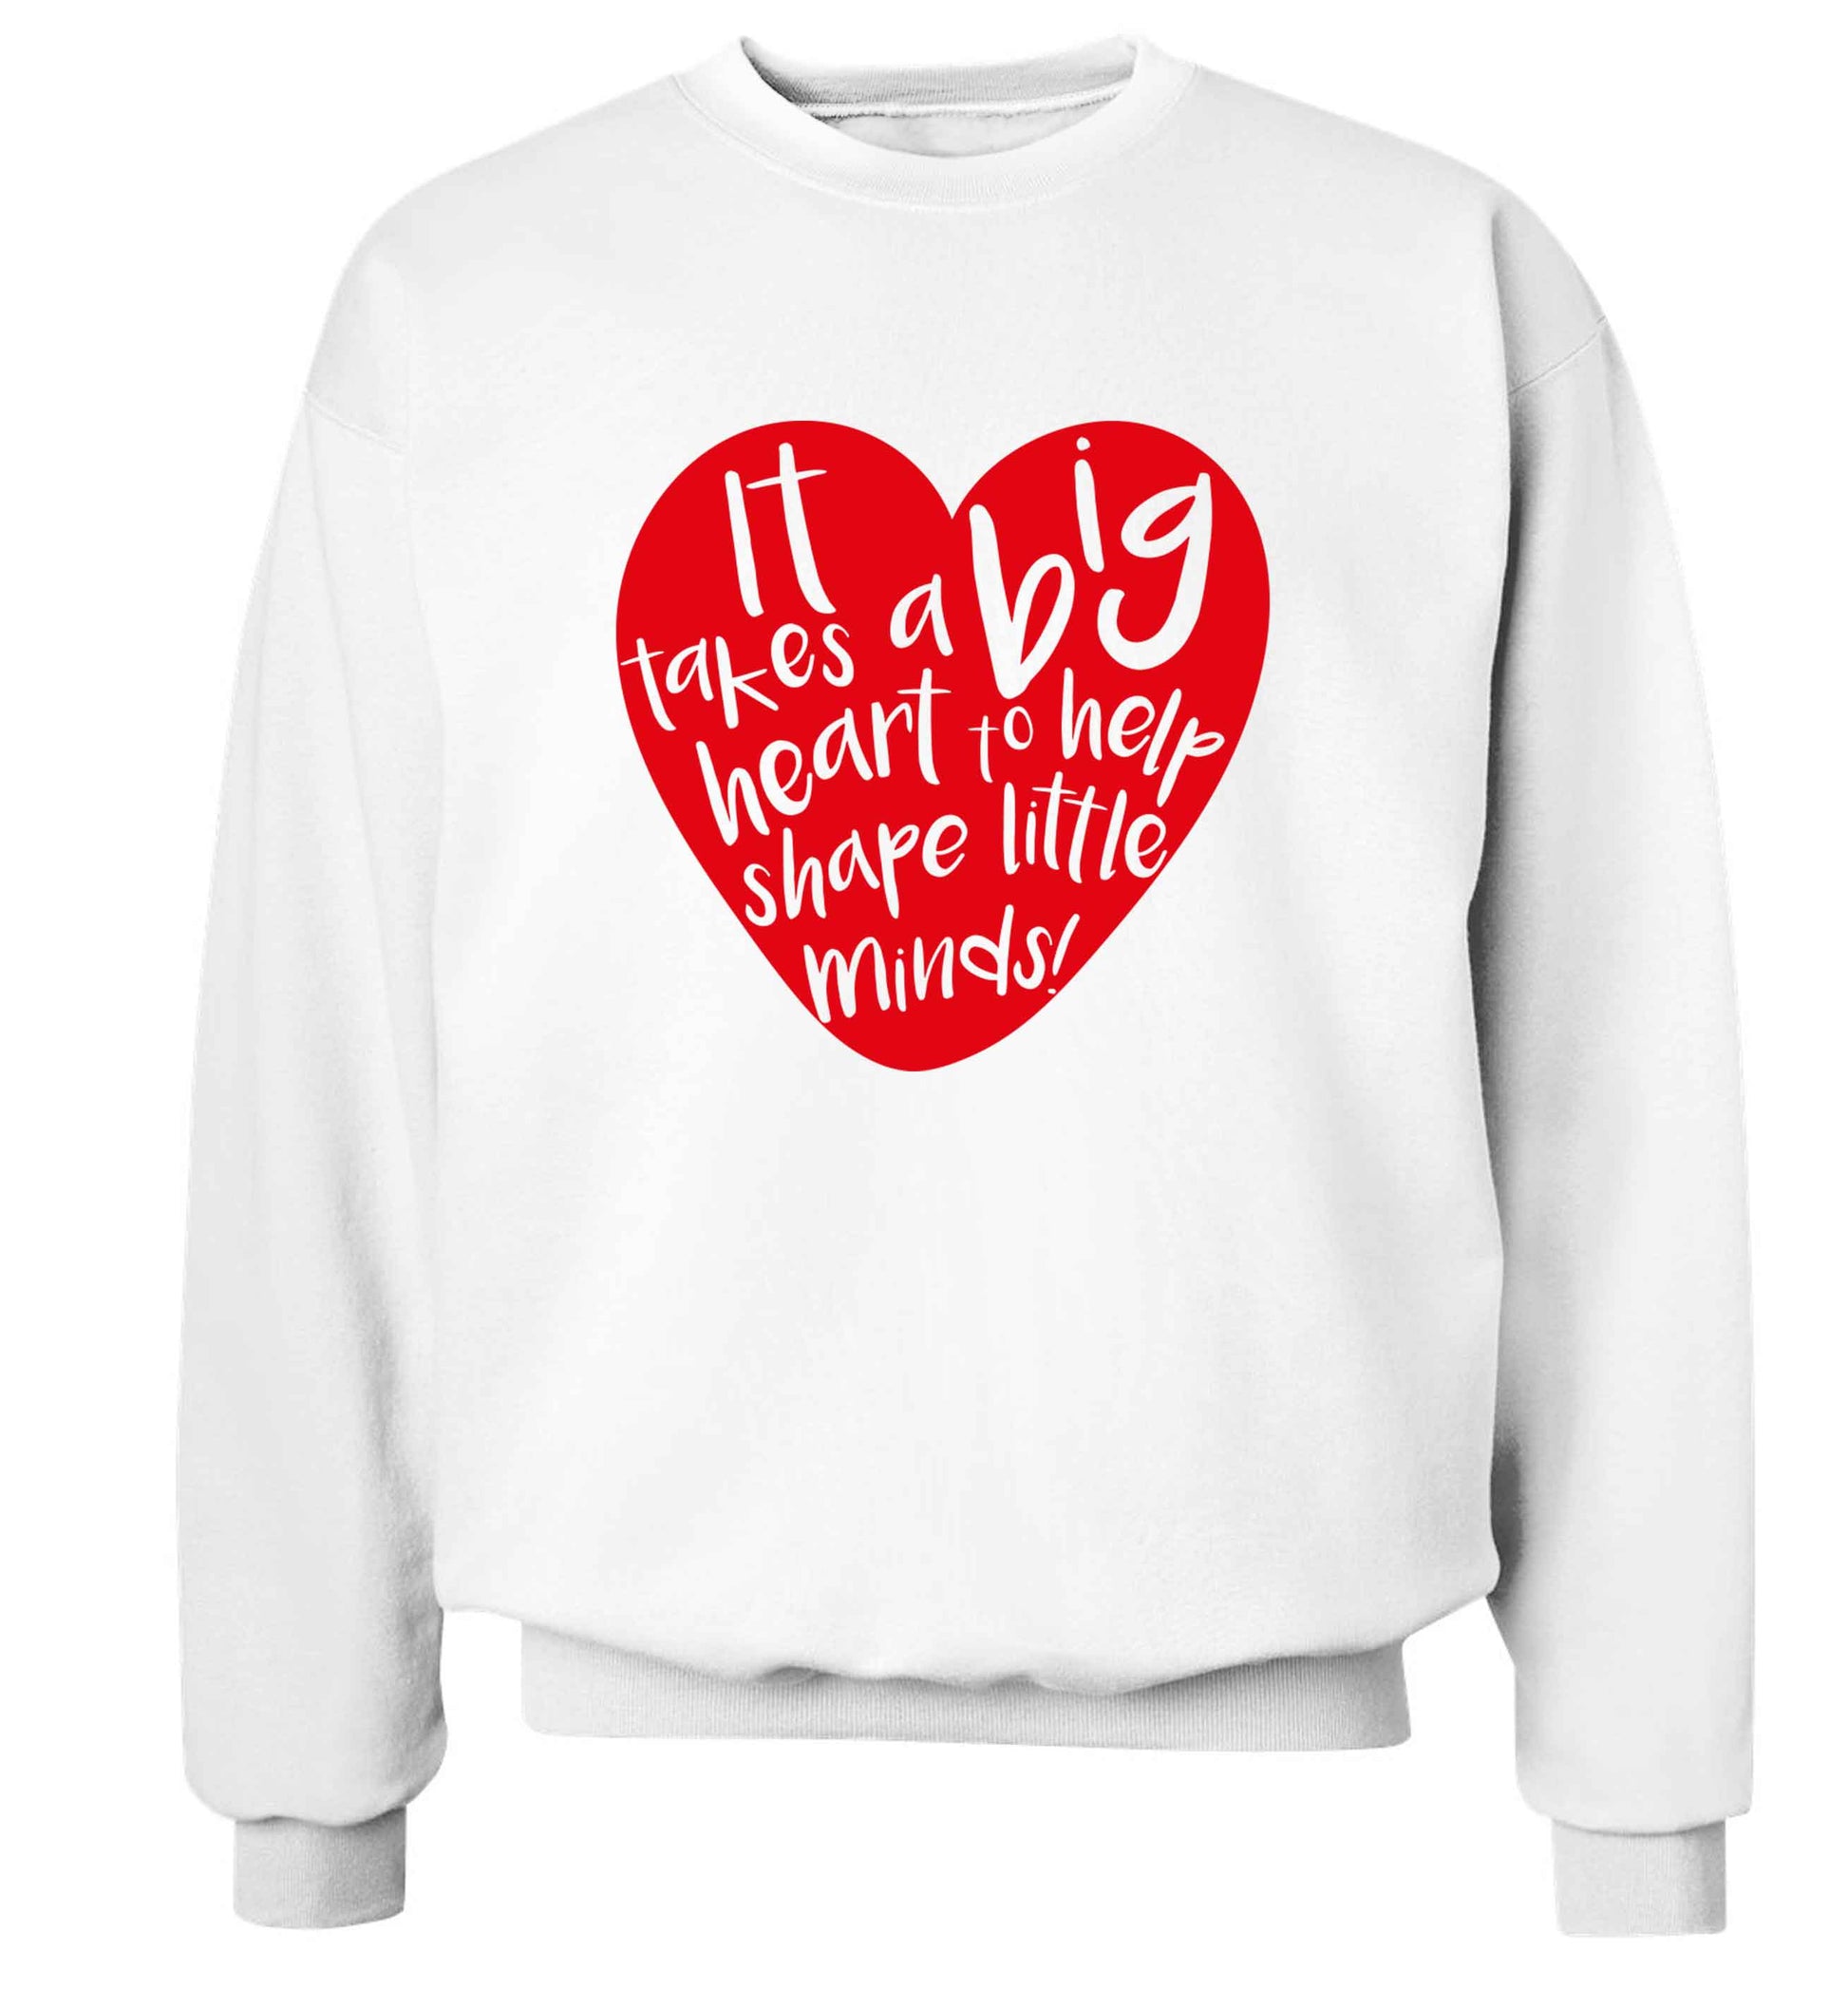 It takes a big heart to help shape little minds adult's unisex white sweater 2XL